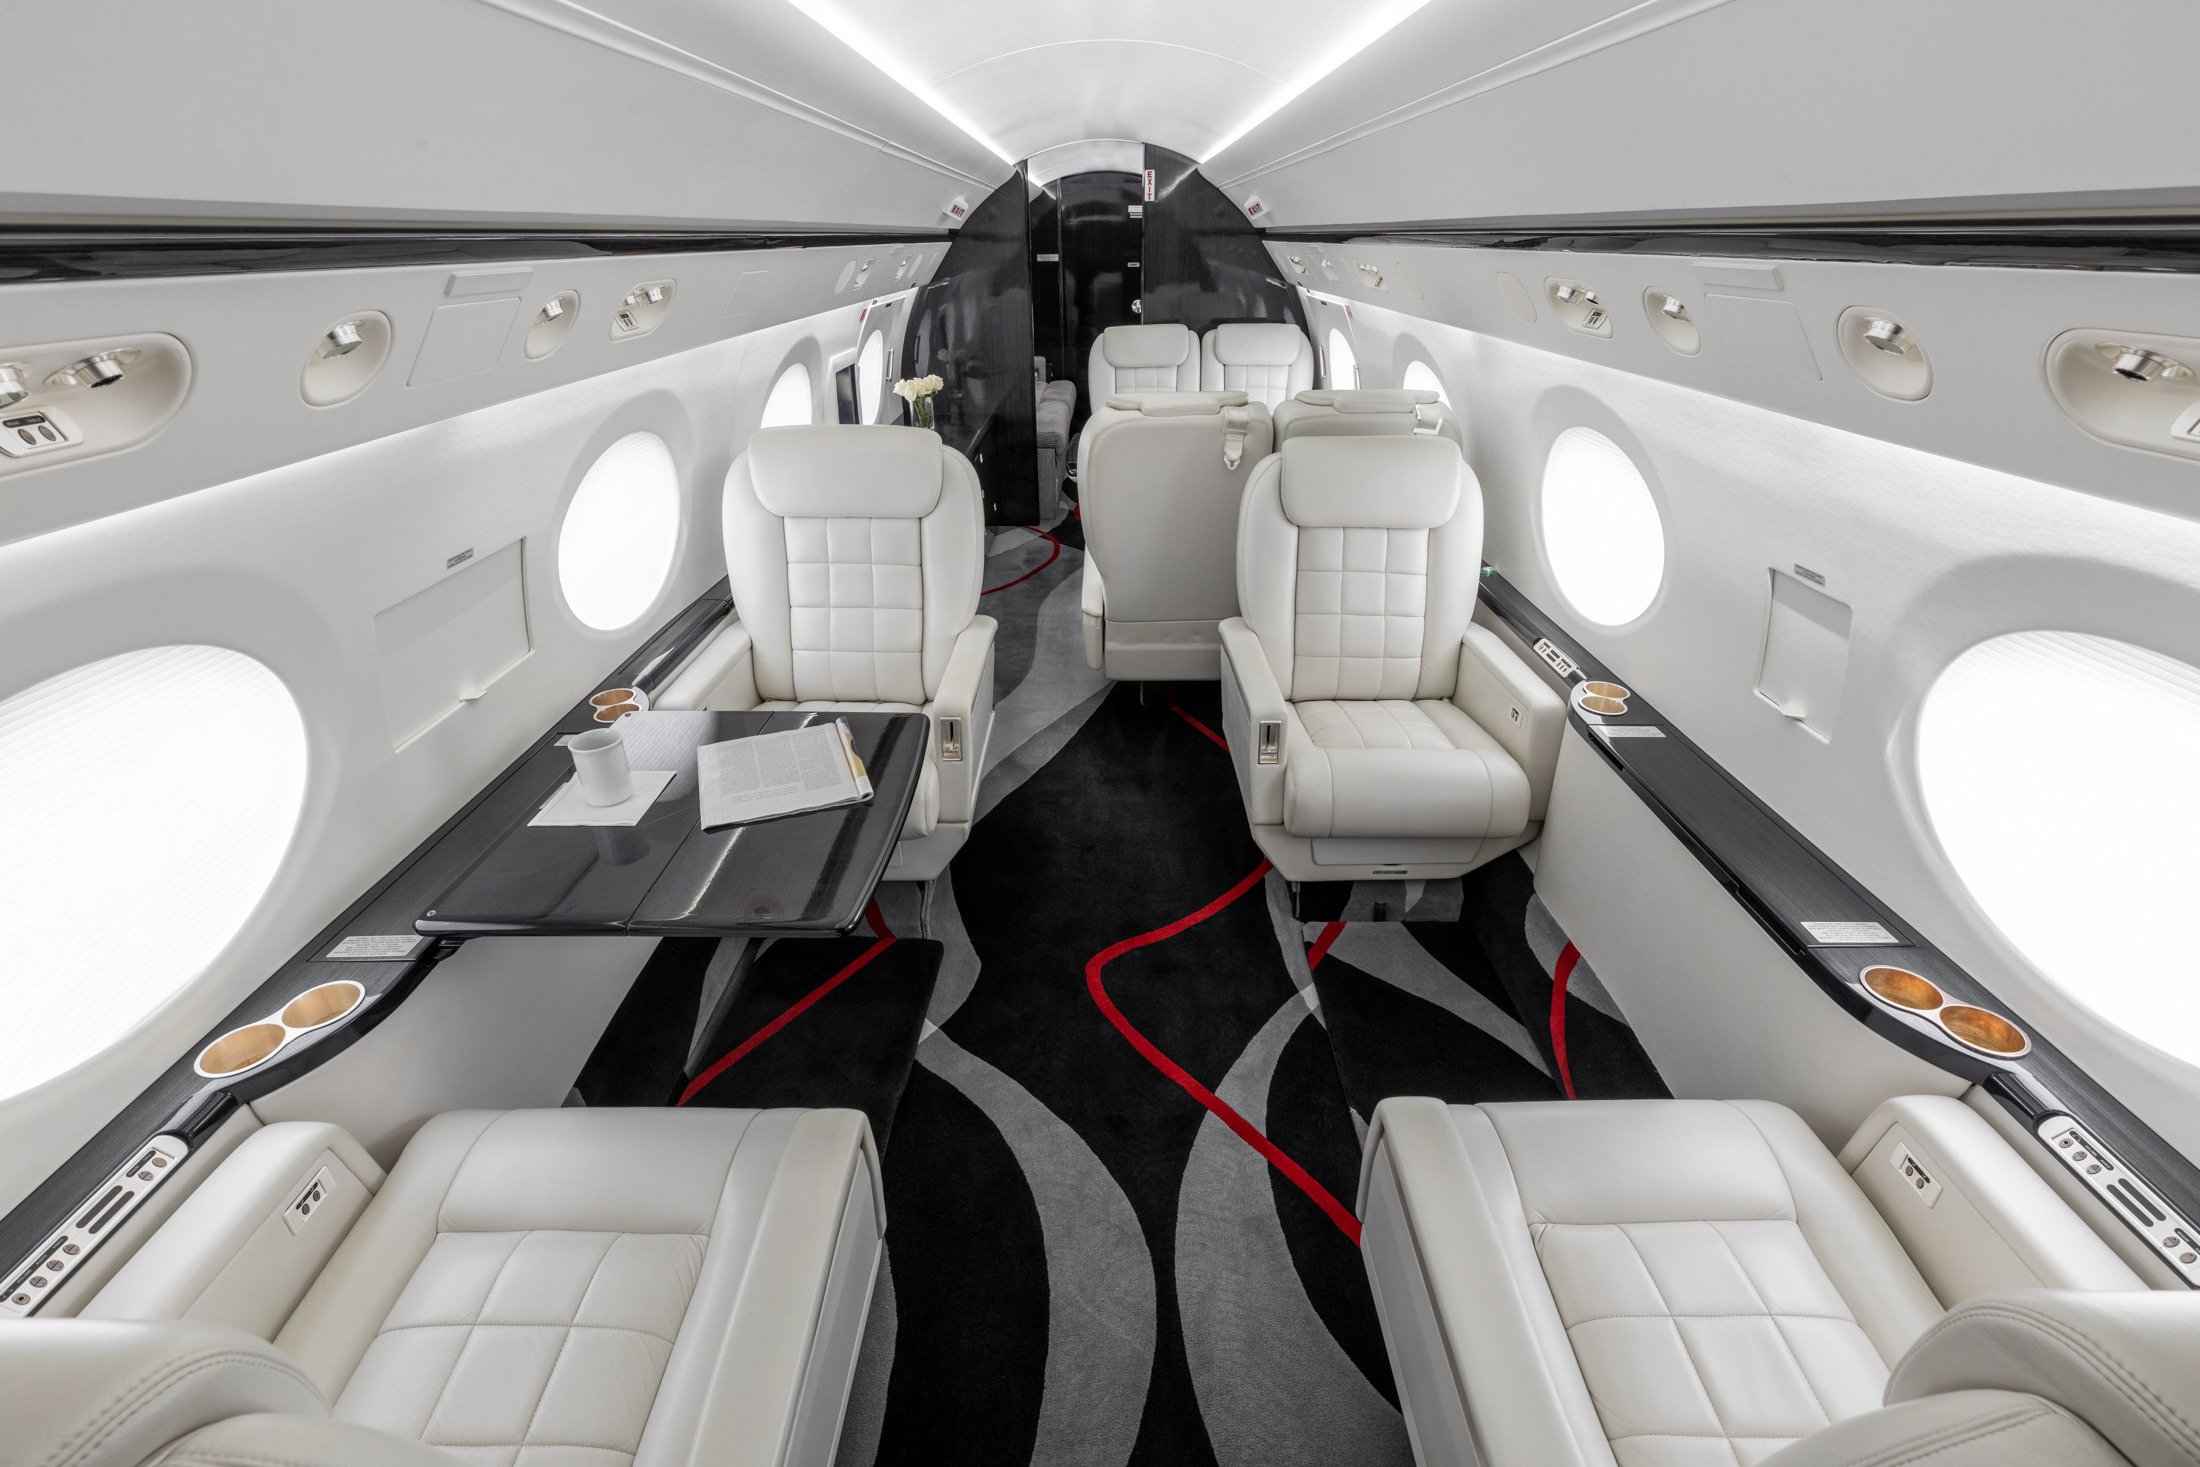 Interior view of the first four passenger seats in the 2005 Gulfstream G550, showcasing luxurious leather upholstery and spacious seating arrangements.